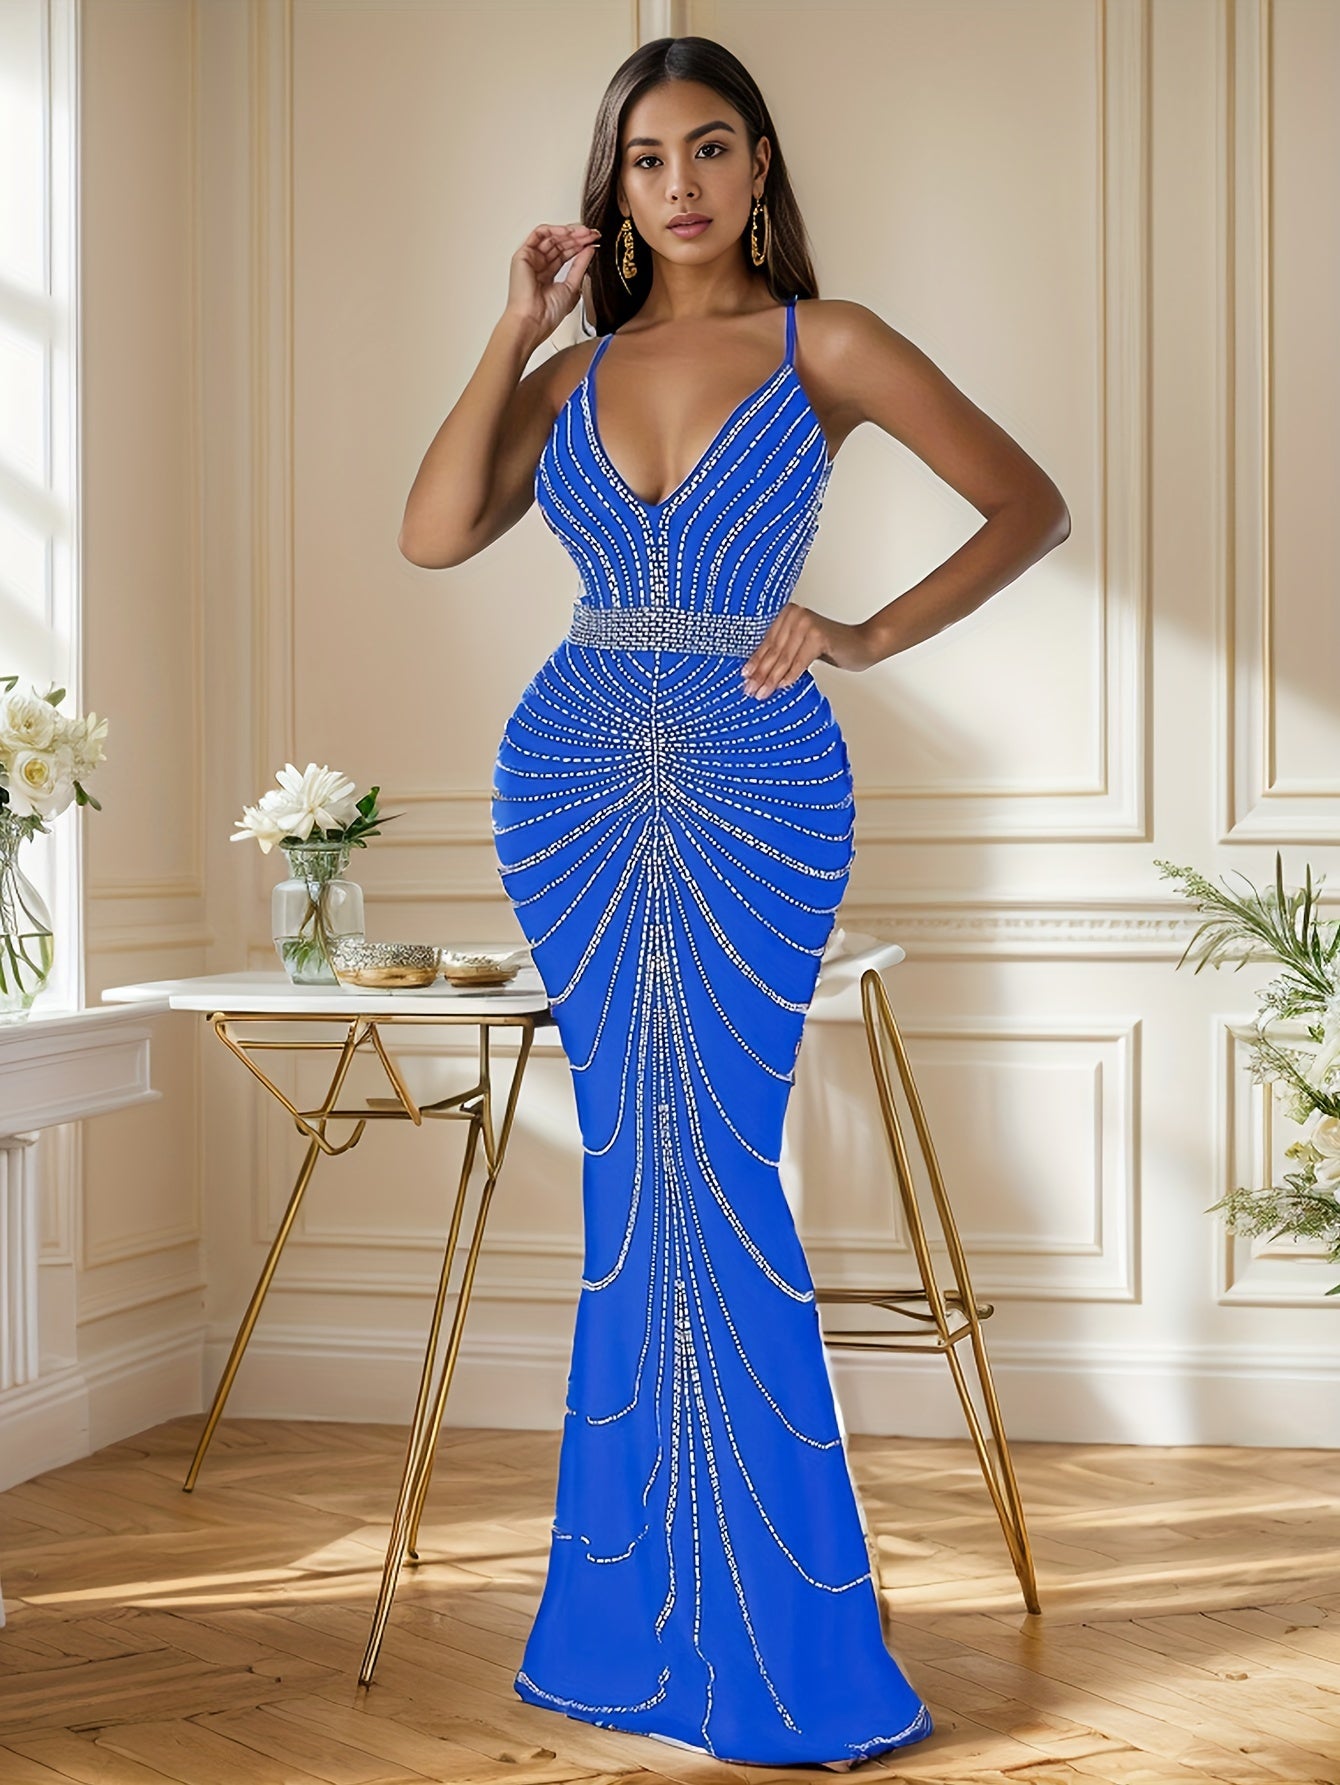 Rhinestone V Neck Cami Dress - Daring V-Neckline, Body-Hugging Silhouette, Floor-Sweeping Hem, Sultry Backless Design, Dazzling Rhinestone Embellishments - Perfect for Glamorous Nights Out at Parties and Clubs, Designed for Fashion-Forward Women